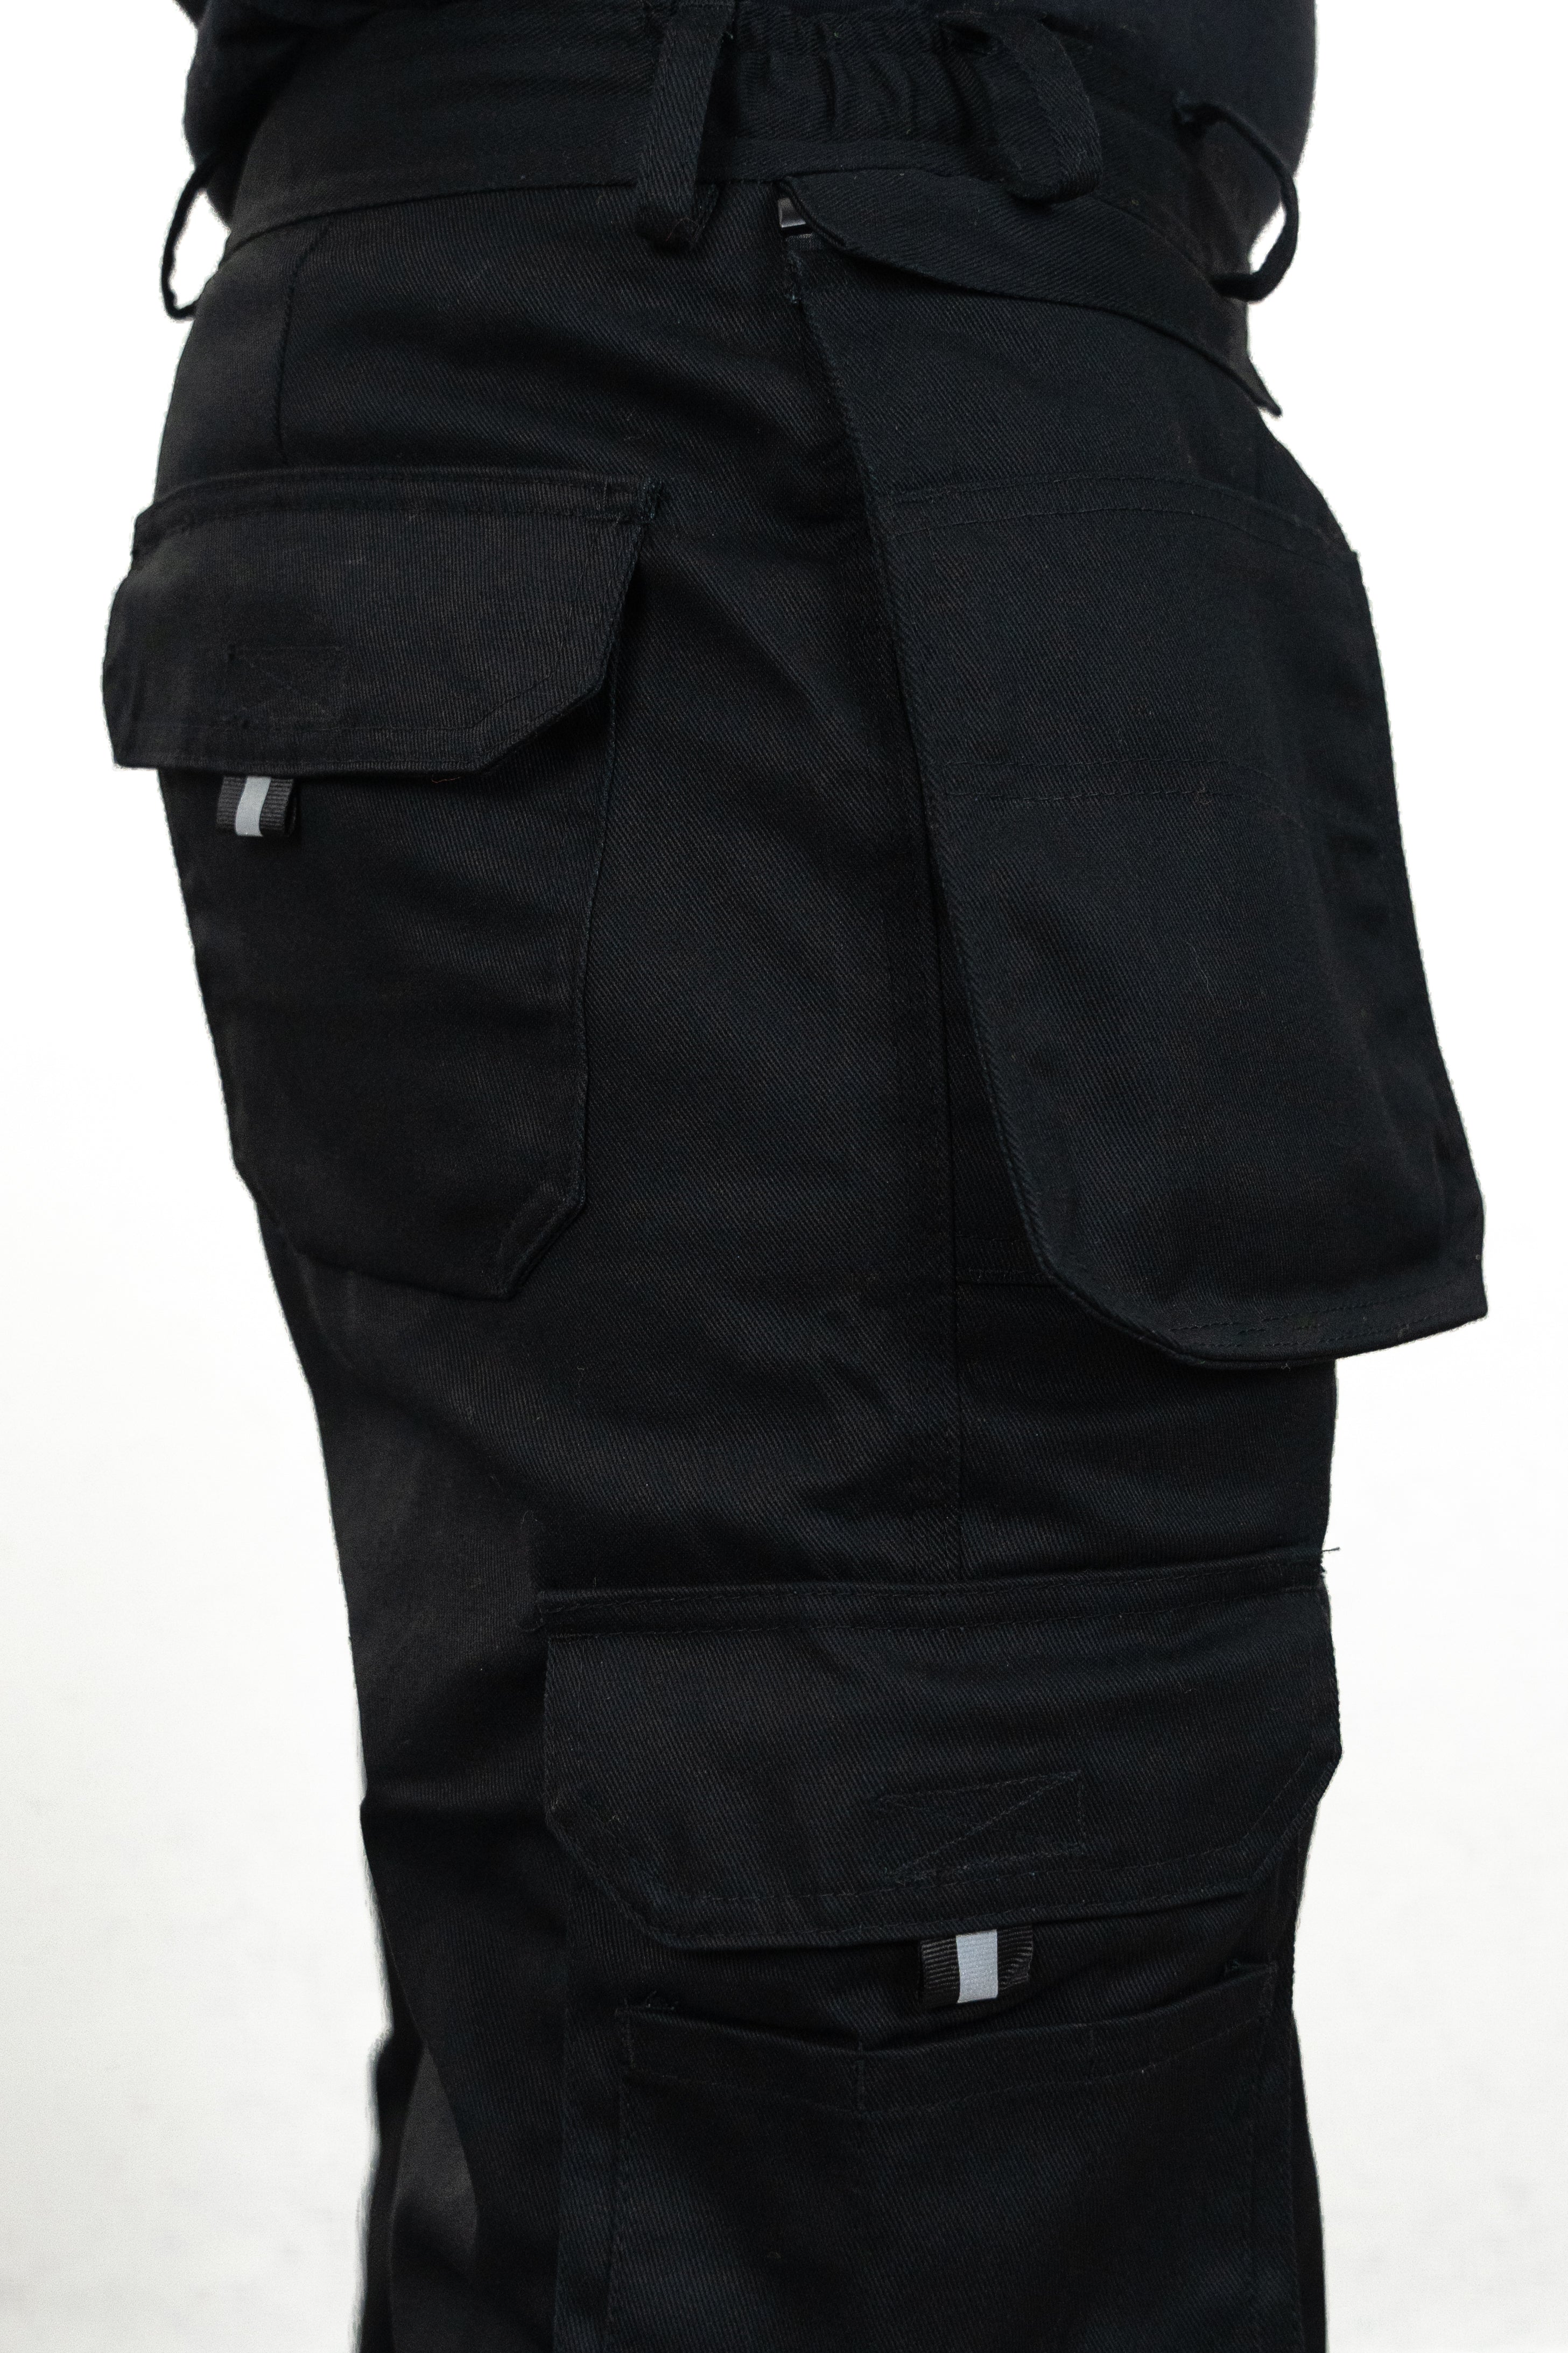 view of rear pocket, side pocket and leg pocket for tools and equipment